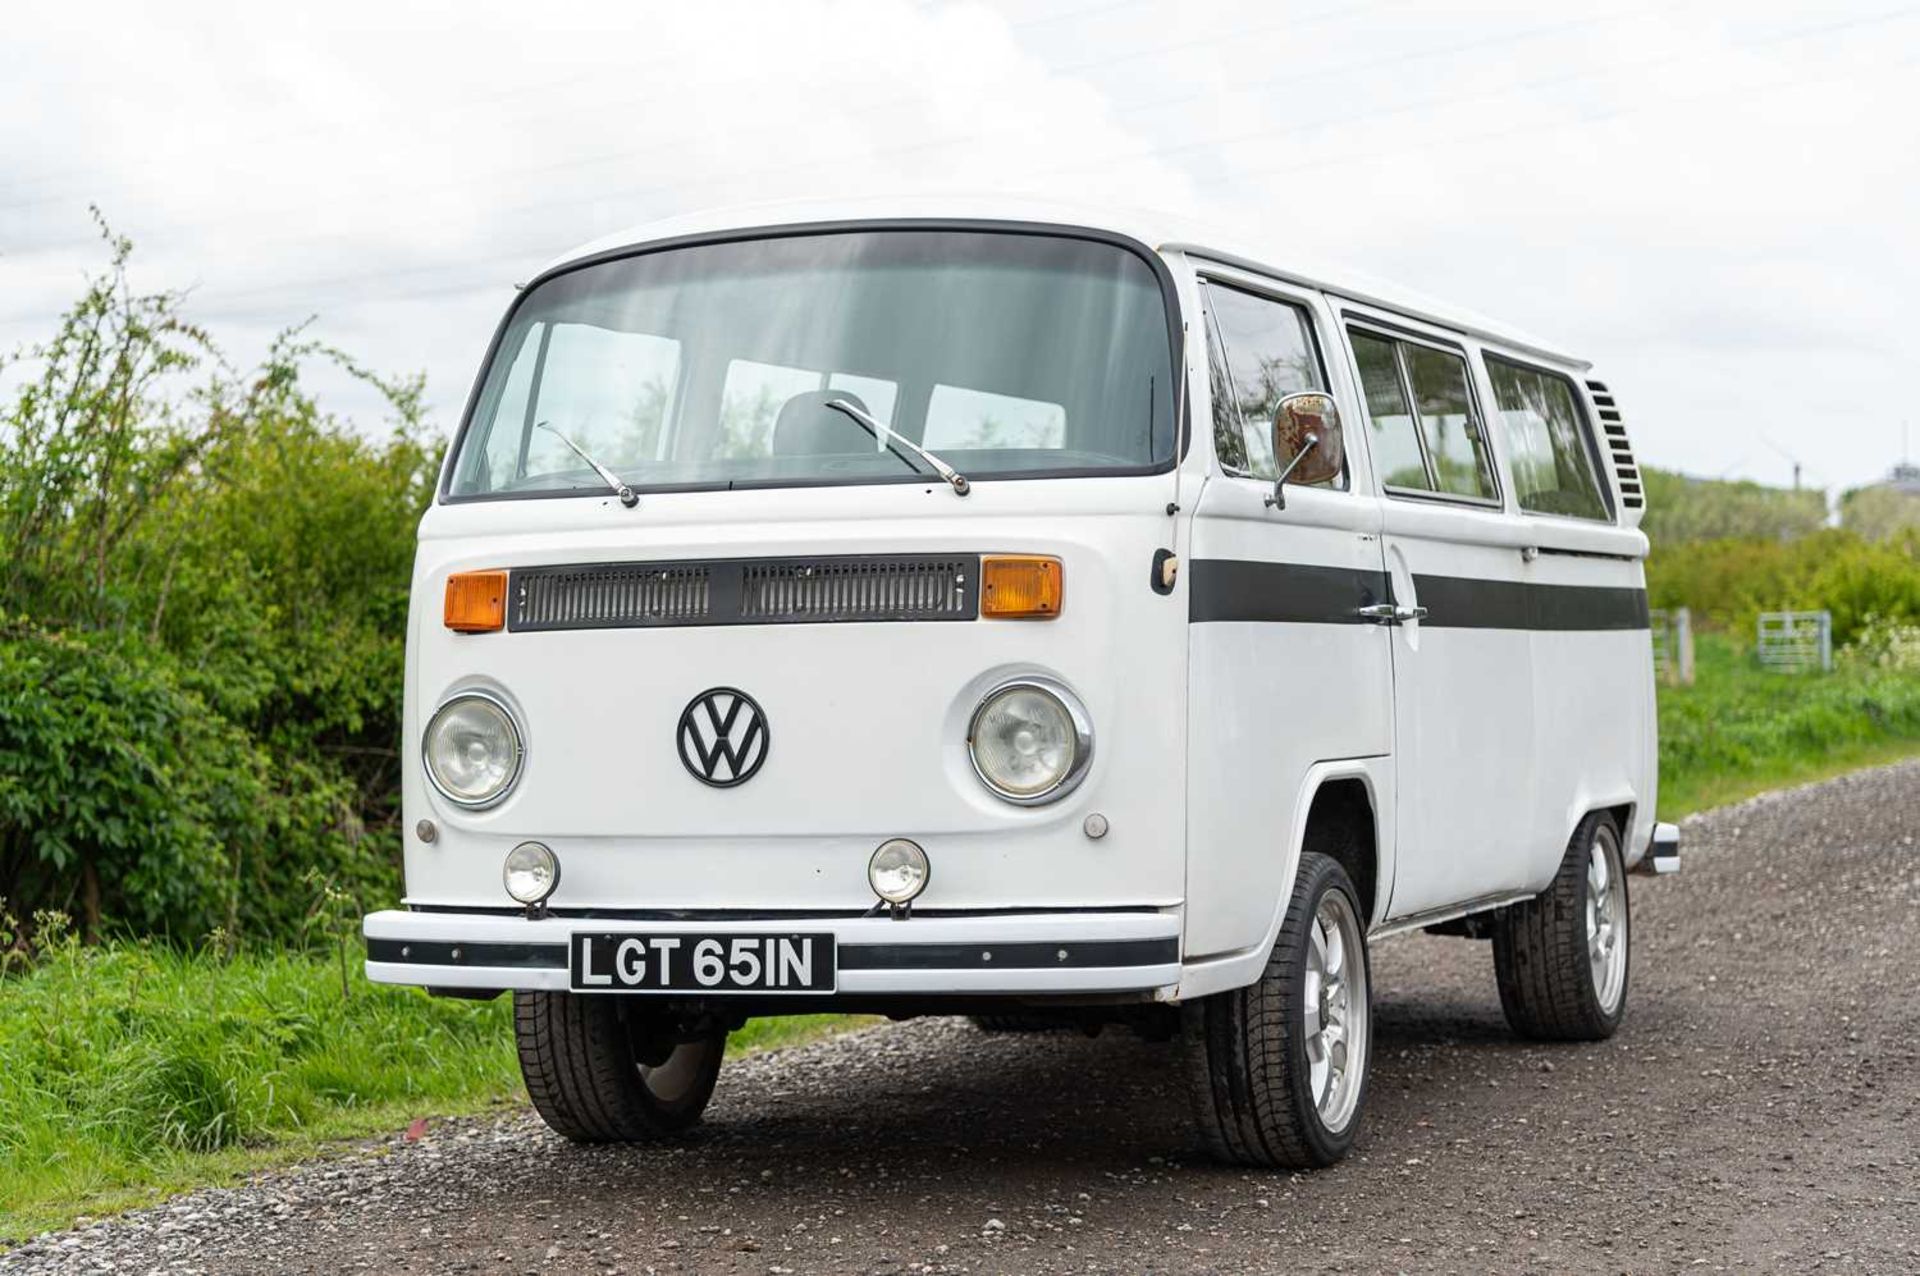 1975 VW T2 Transporter Recently repatriated from the car-friendly climate of South Africa - Image 5 of 60